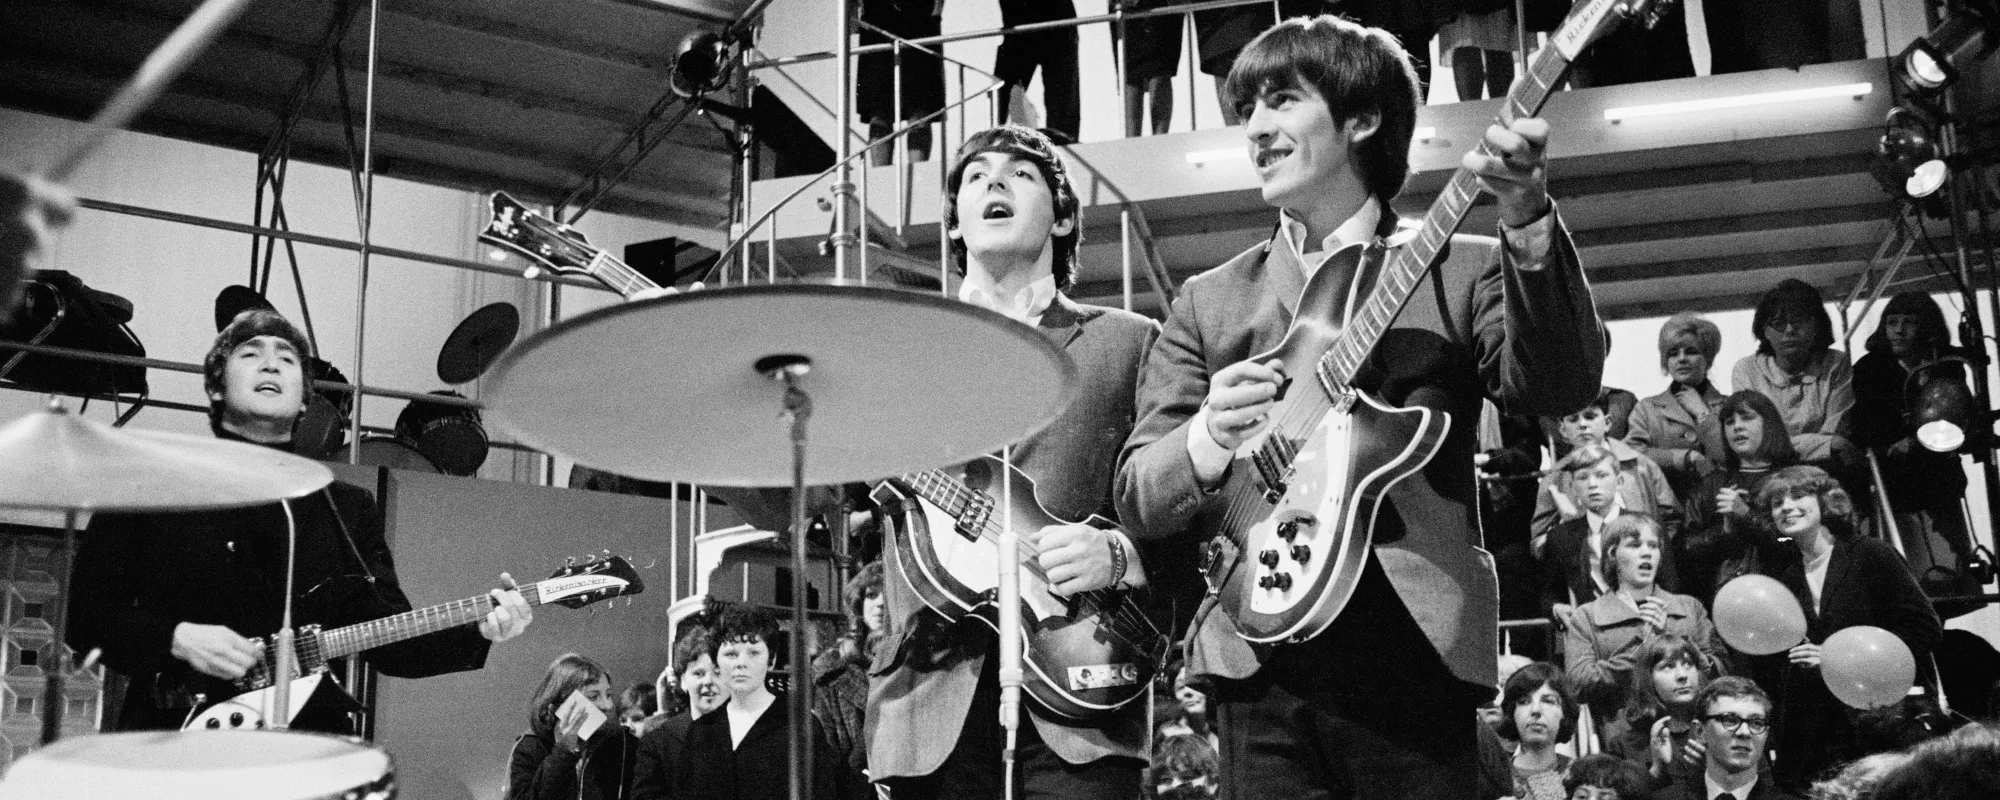 The Story Behind the Beatles’ Debut Single, “Love Me Do”